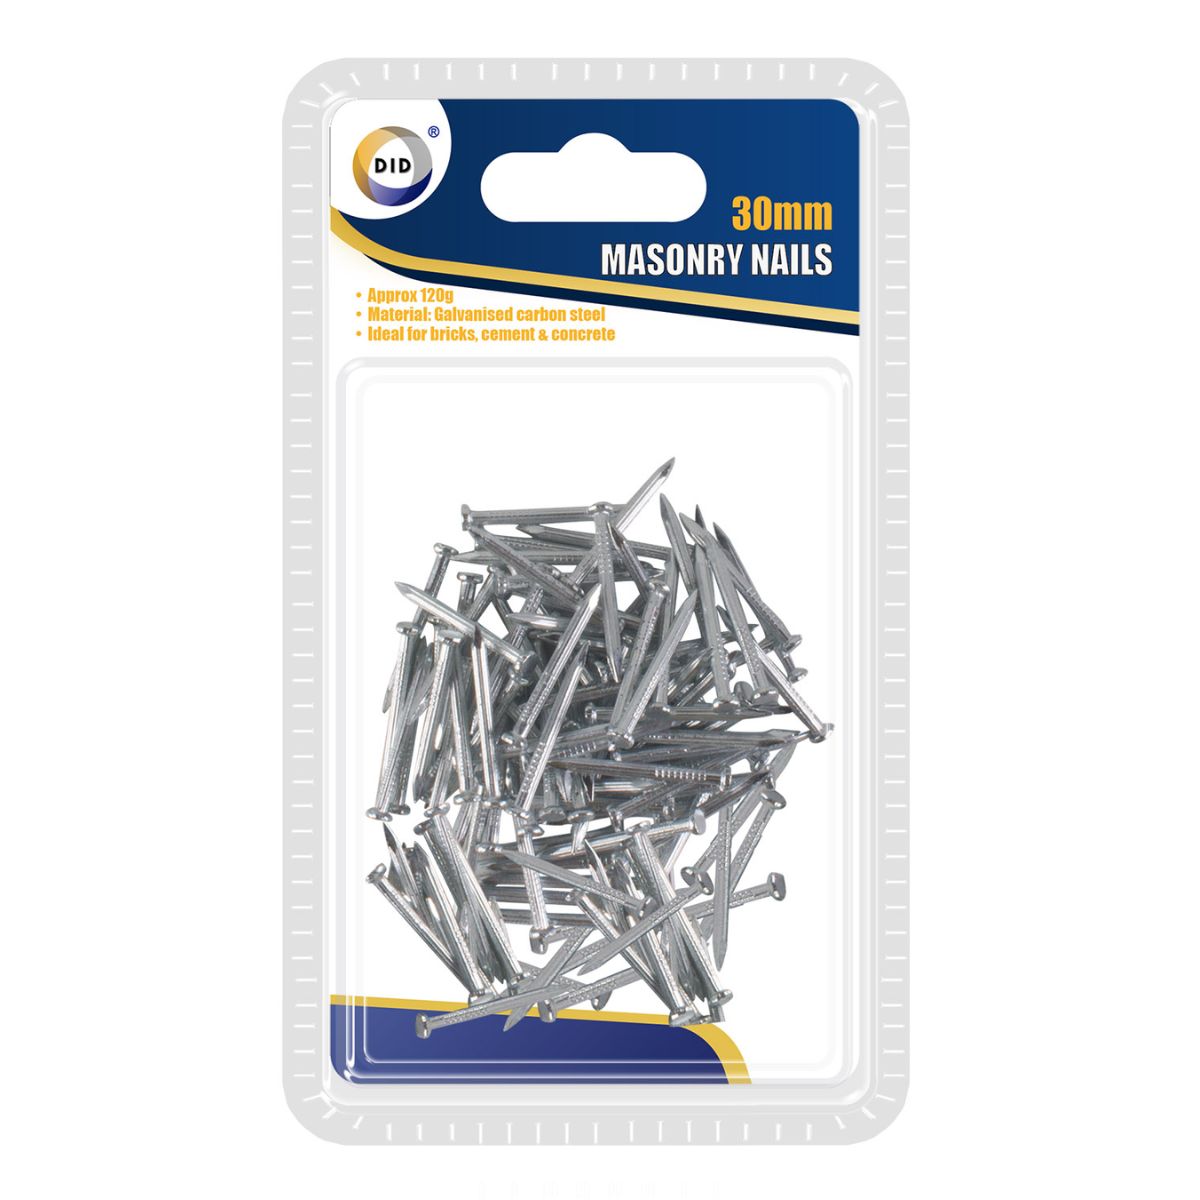 A package of DID - 30mm Masonry Nails, labeled as suitable for bricks, cement, and concrete, displayed in a clear plastic blister pack.